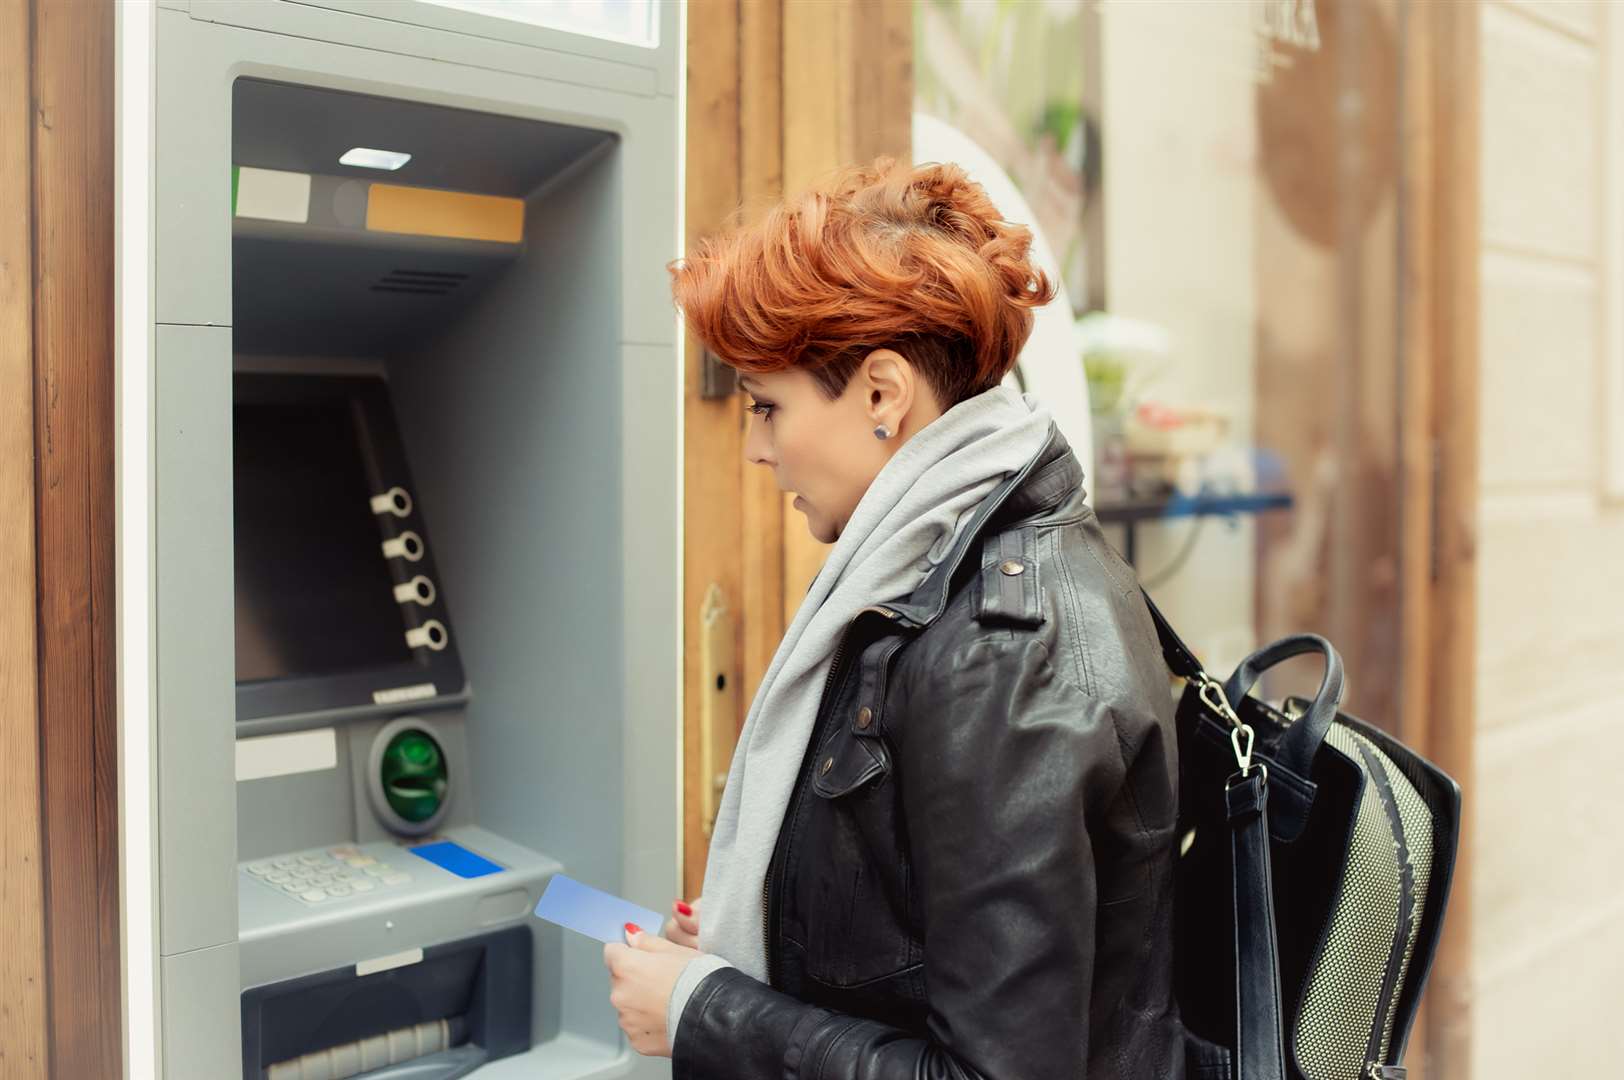 Police are urging customers to be vigilant at cash machines. Stock Image